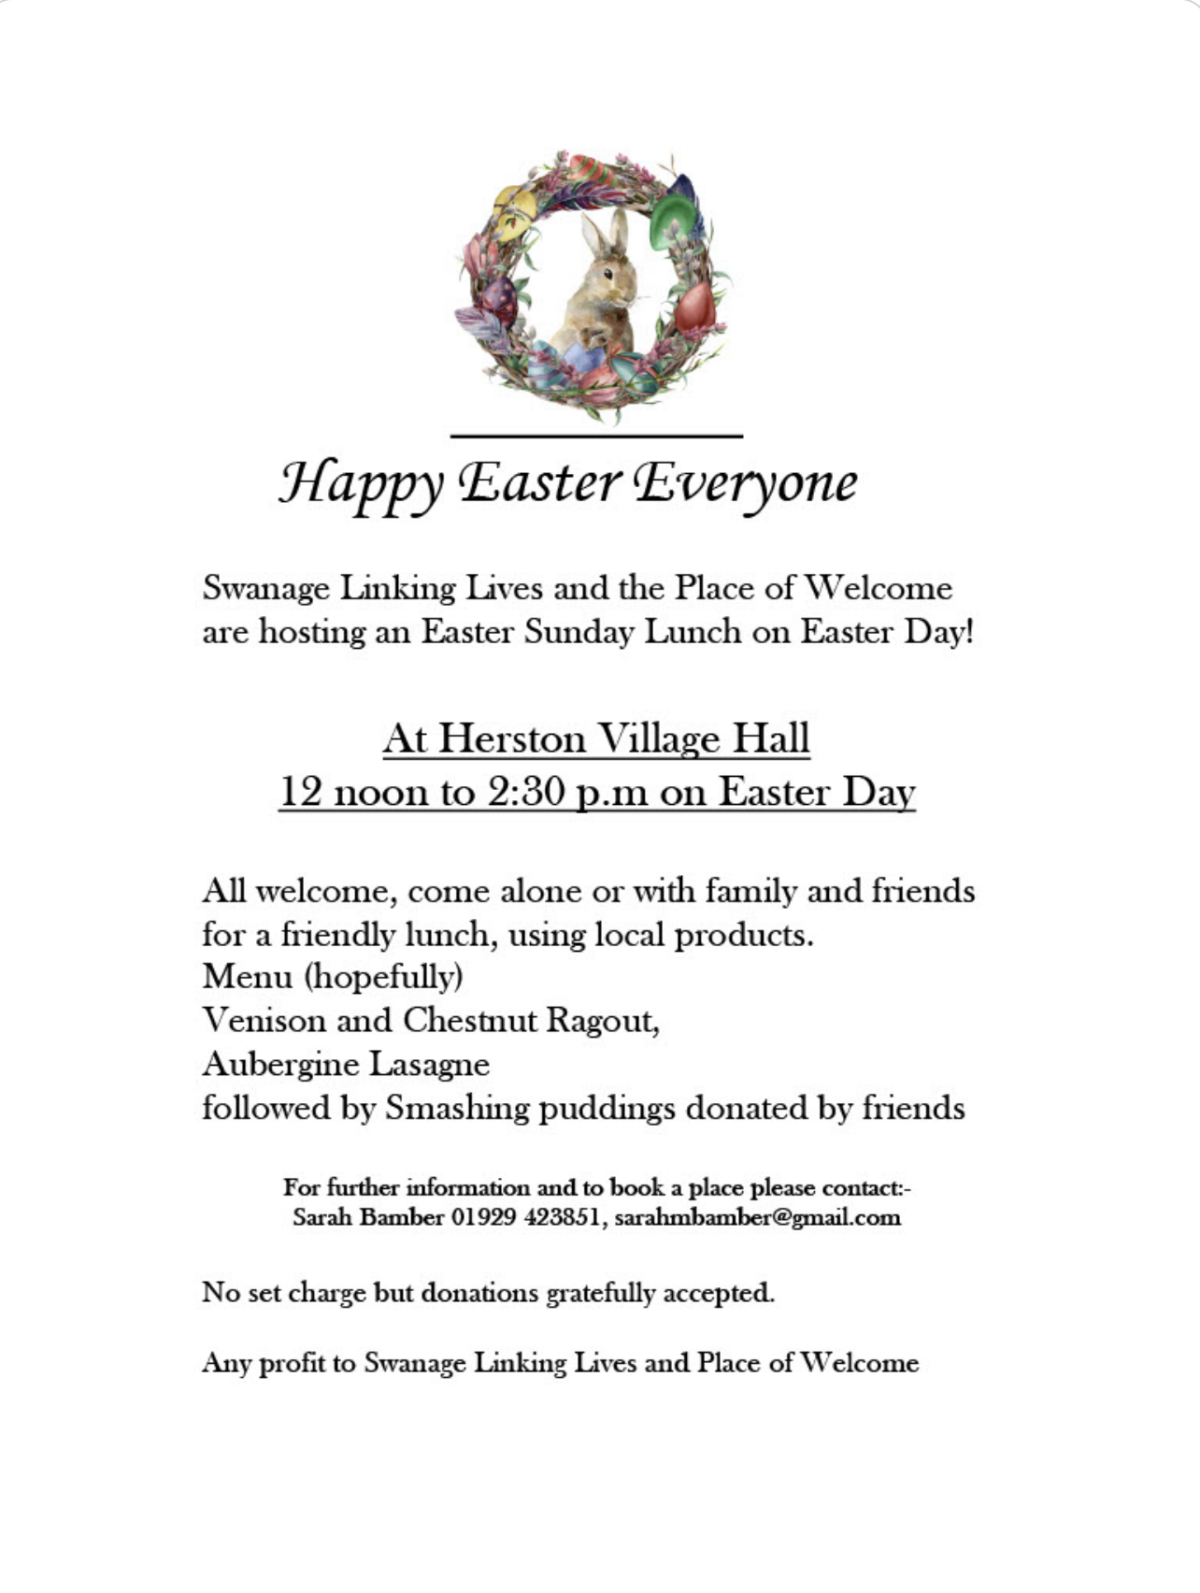 Easter Sunday lunch Swanage Linking Lives & Place of Welcome